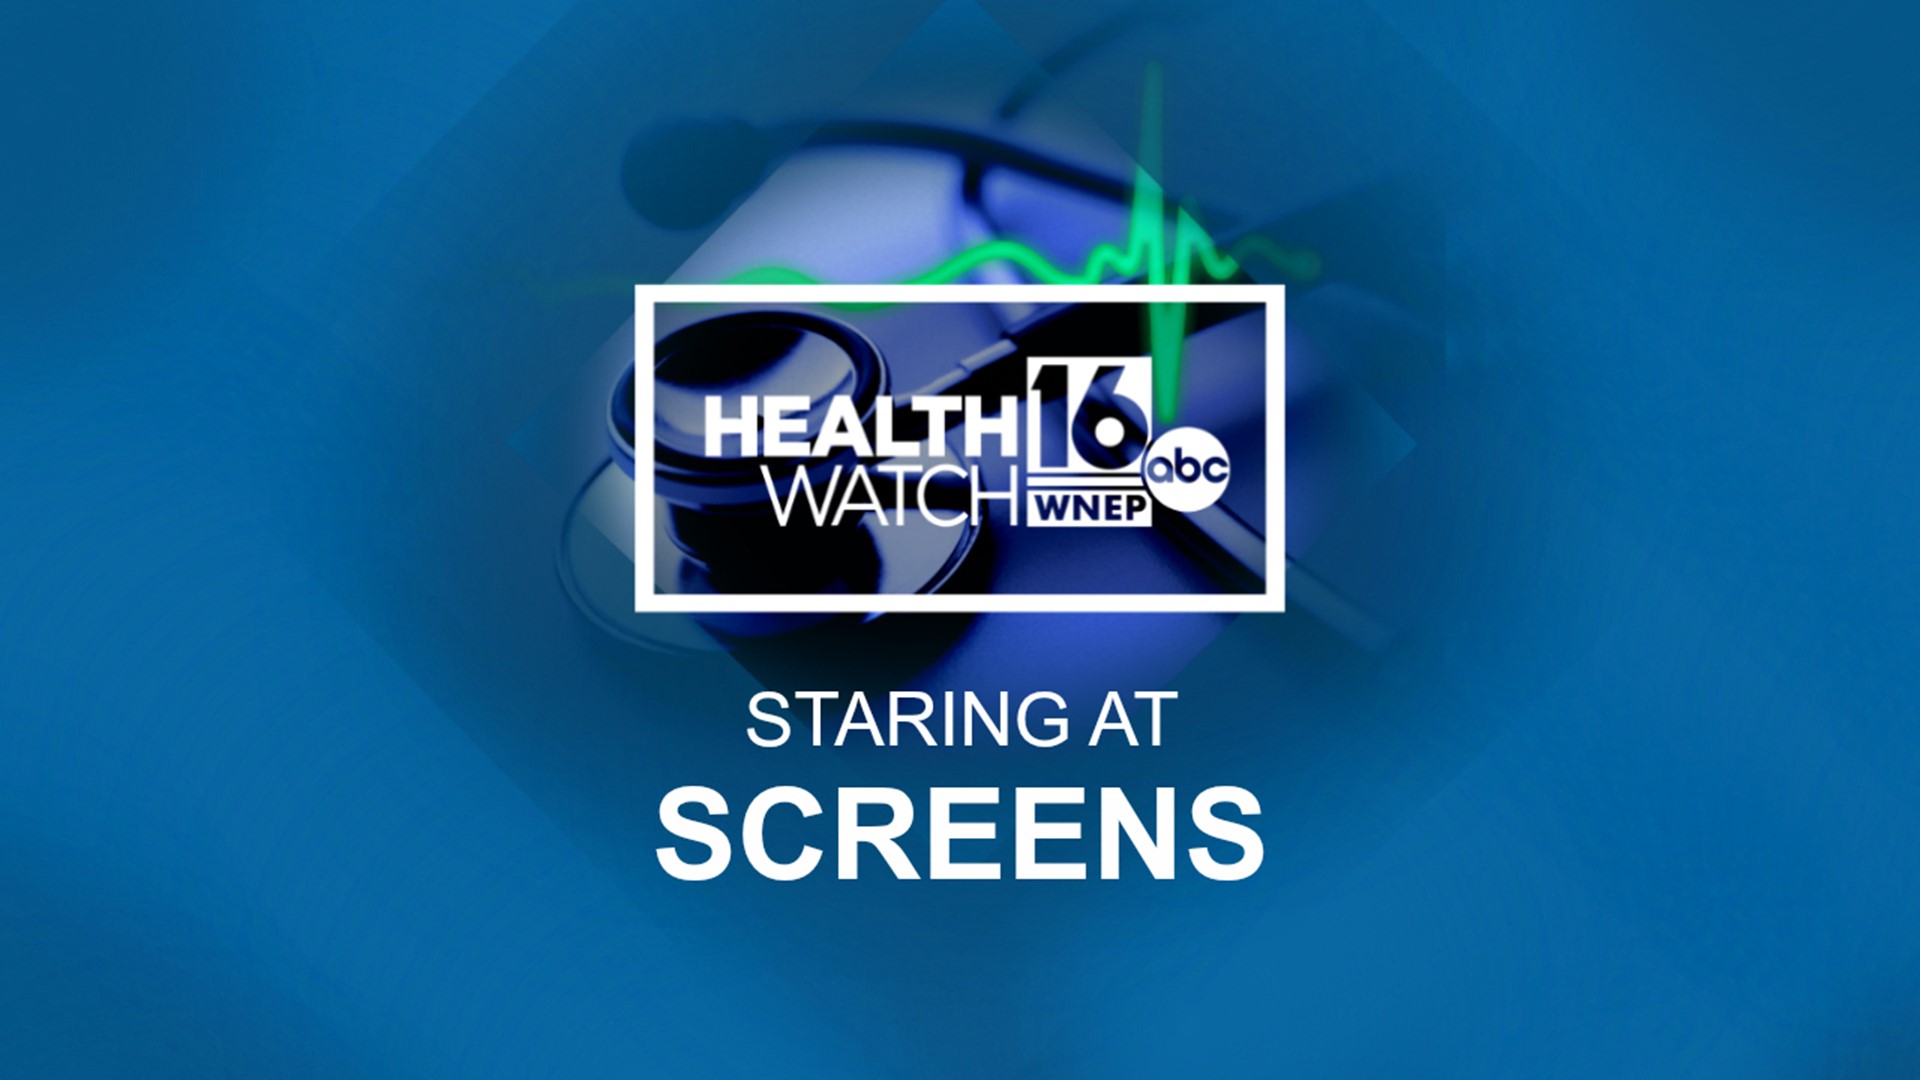 Experts from Geisinger have advice to help you avoid eye problems from extra screen time during the pandemic.